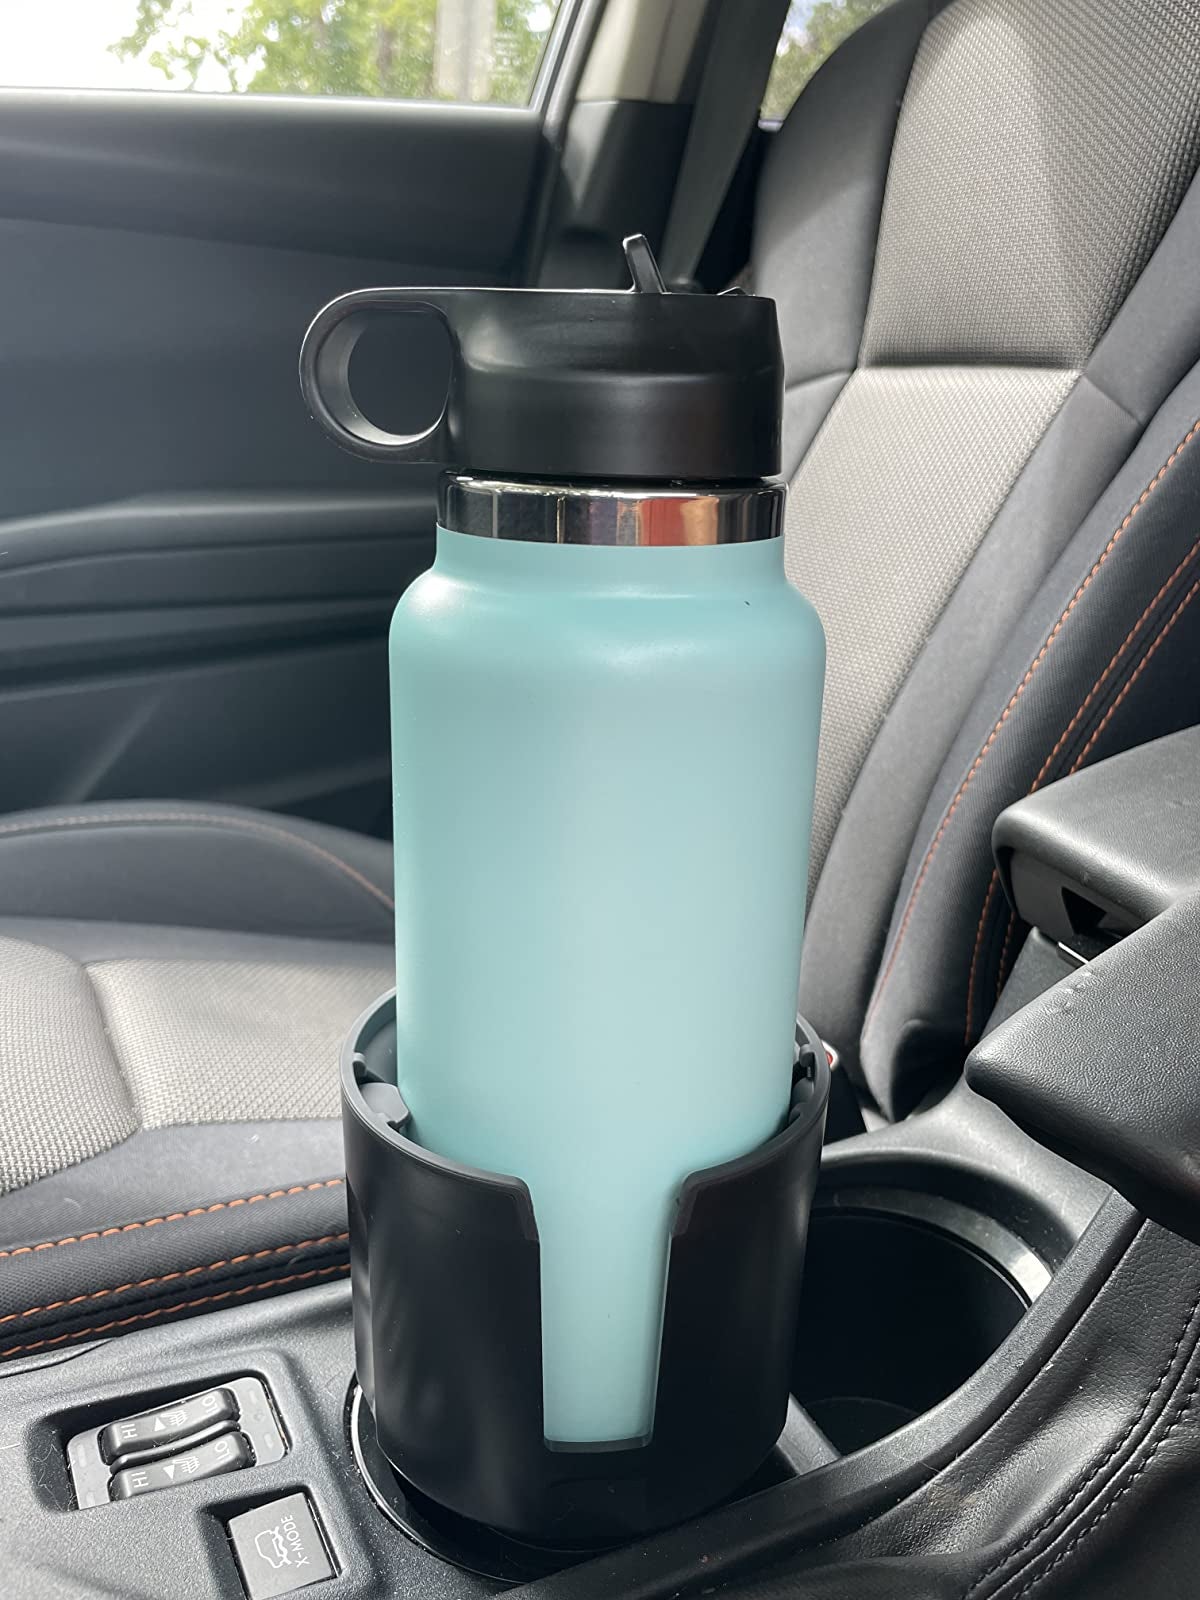 reviewer image of a Hydro Flask sitting in a car cup holder in a car